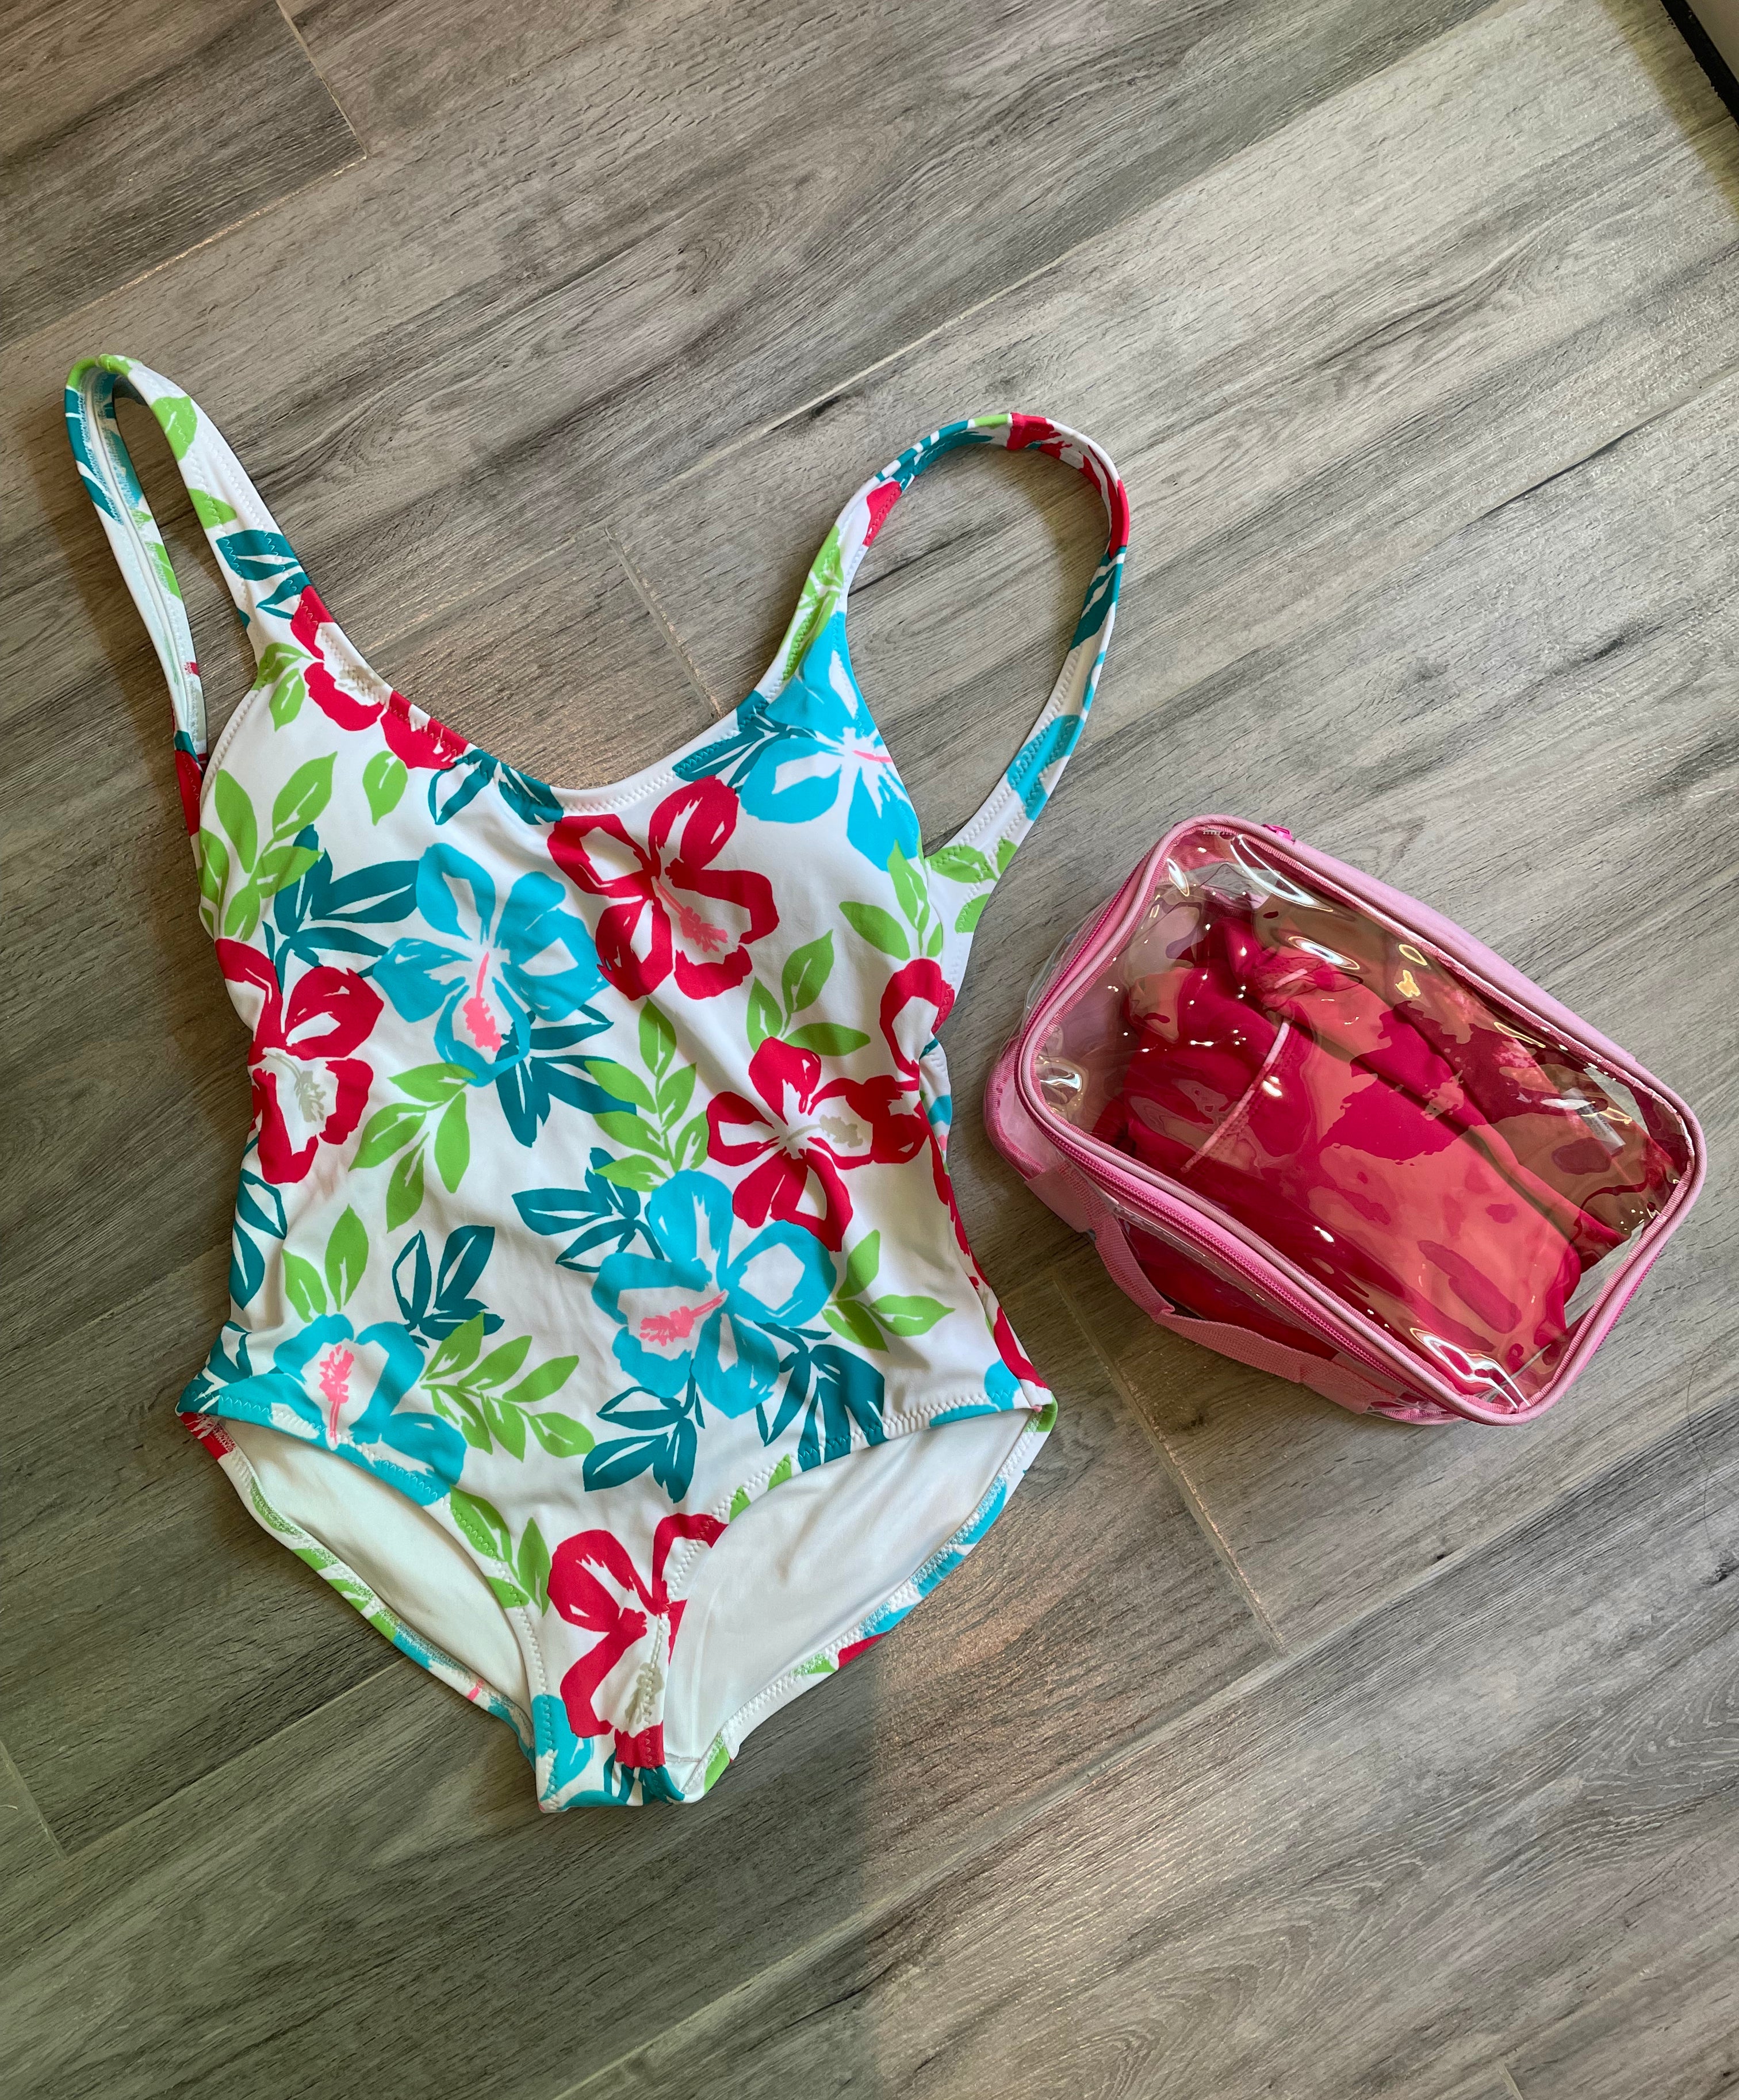 Swimsuit for cruise packing list